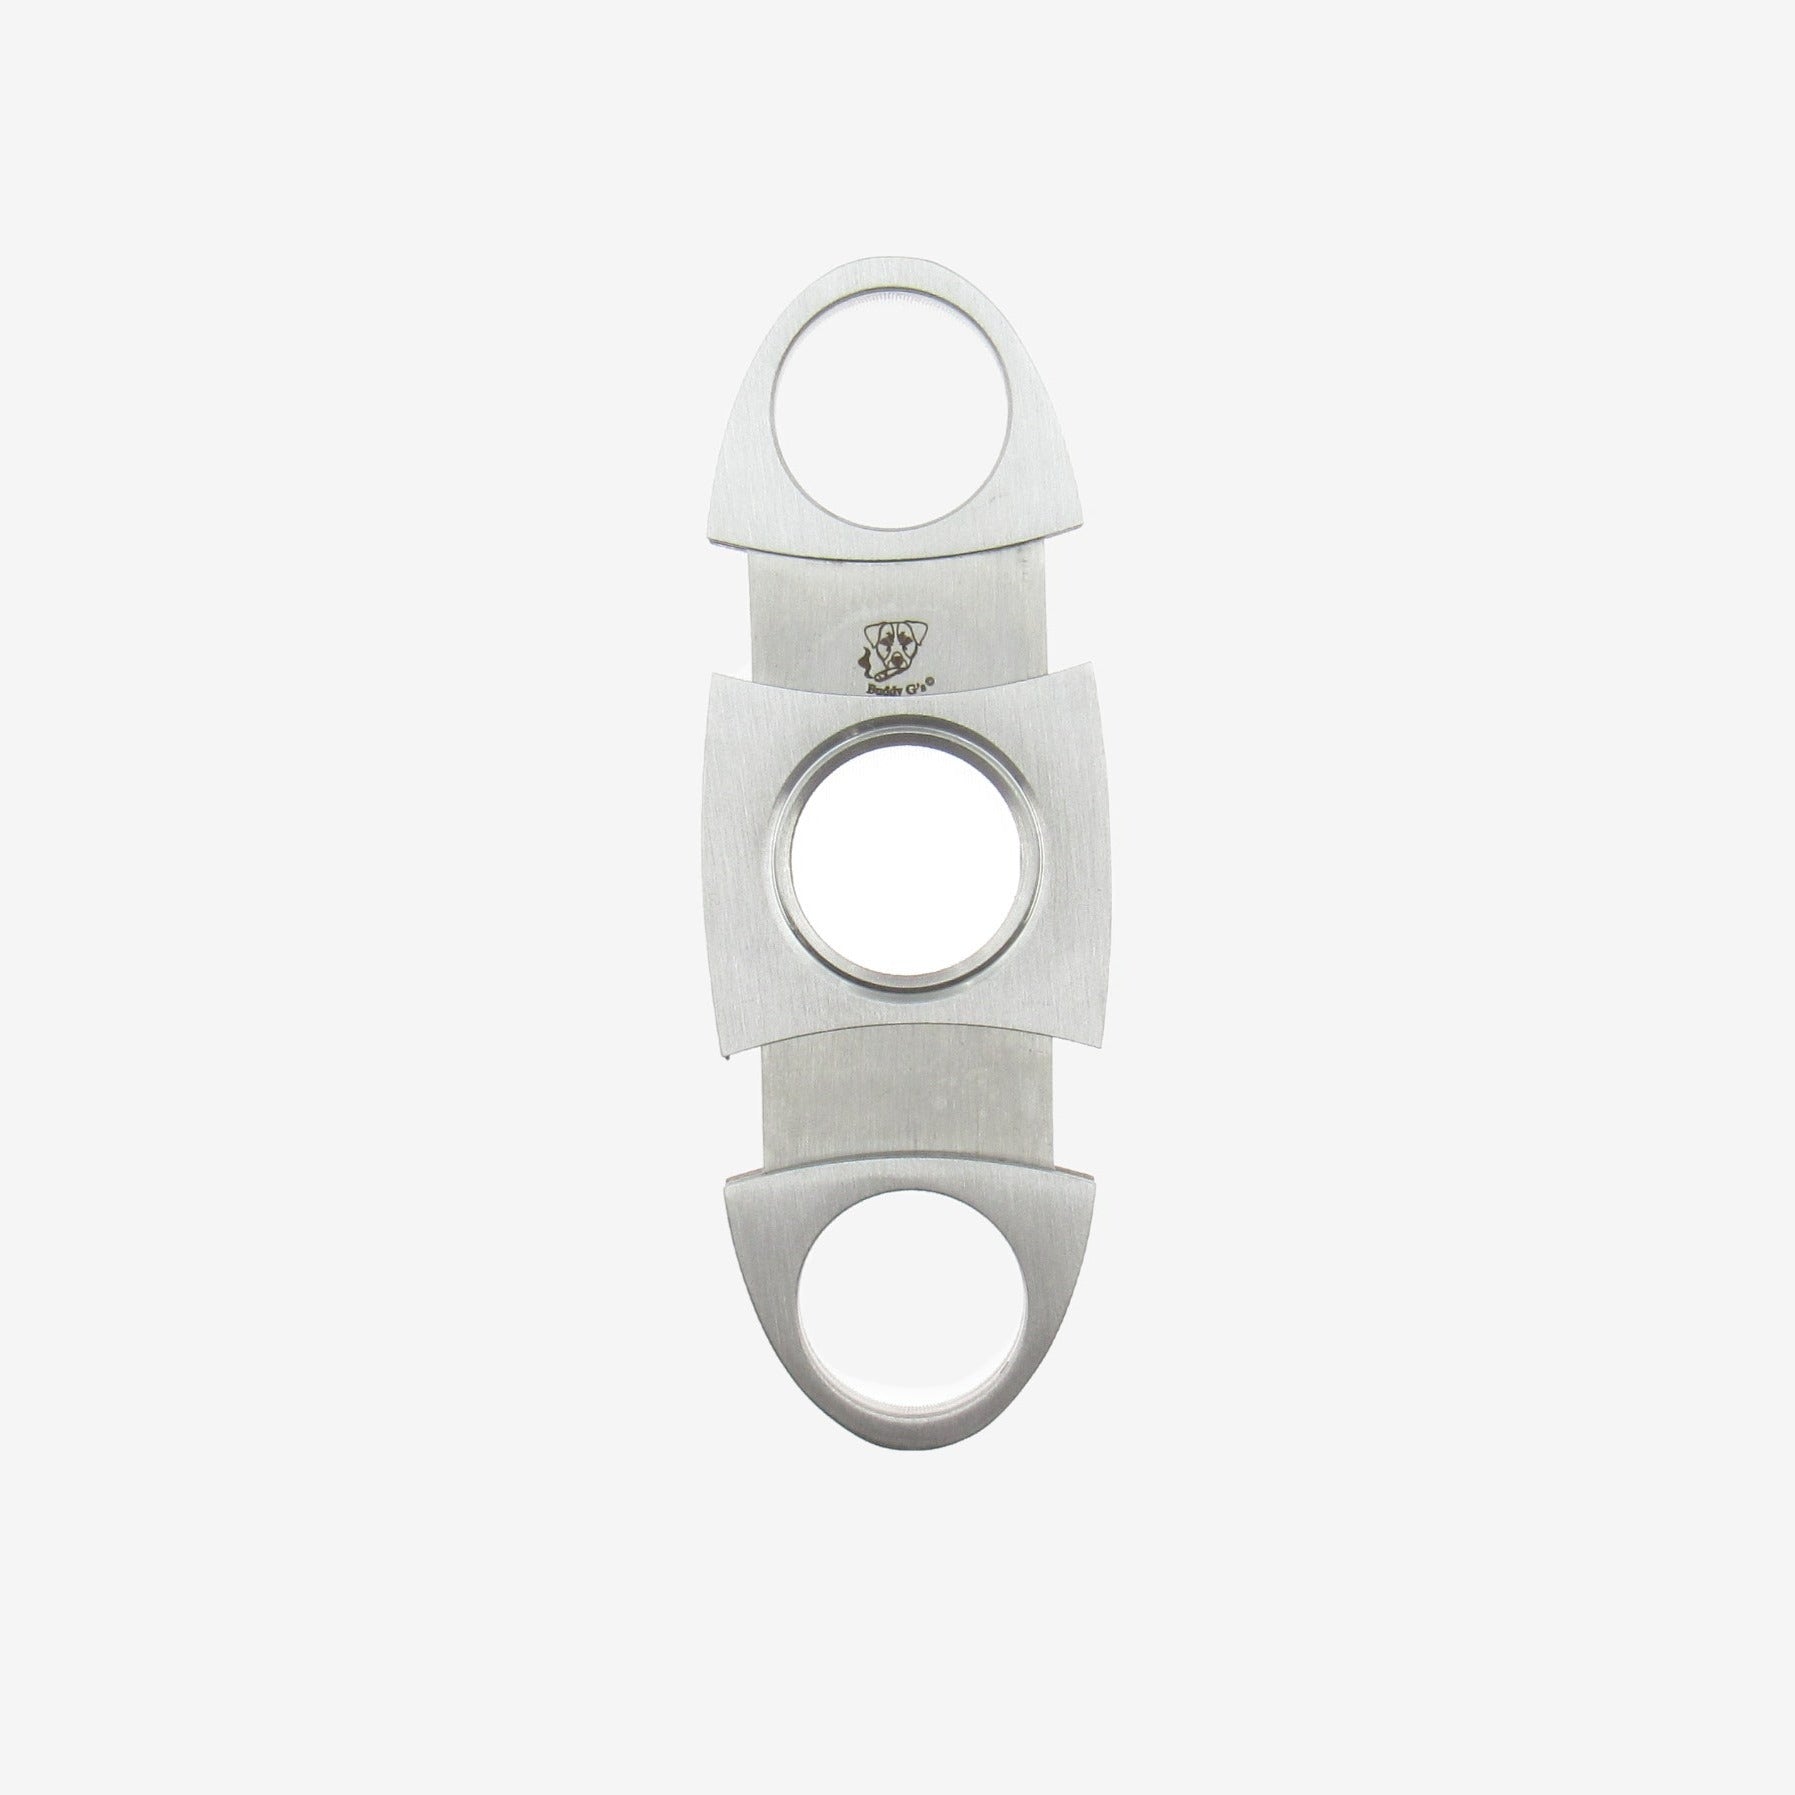 Cigar Cutter - High-Quality Stainless-Steel Double Blade Guillotine Buddy G's Cigar Cutter